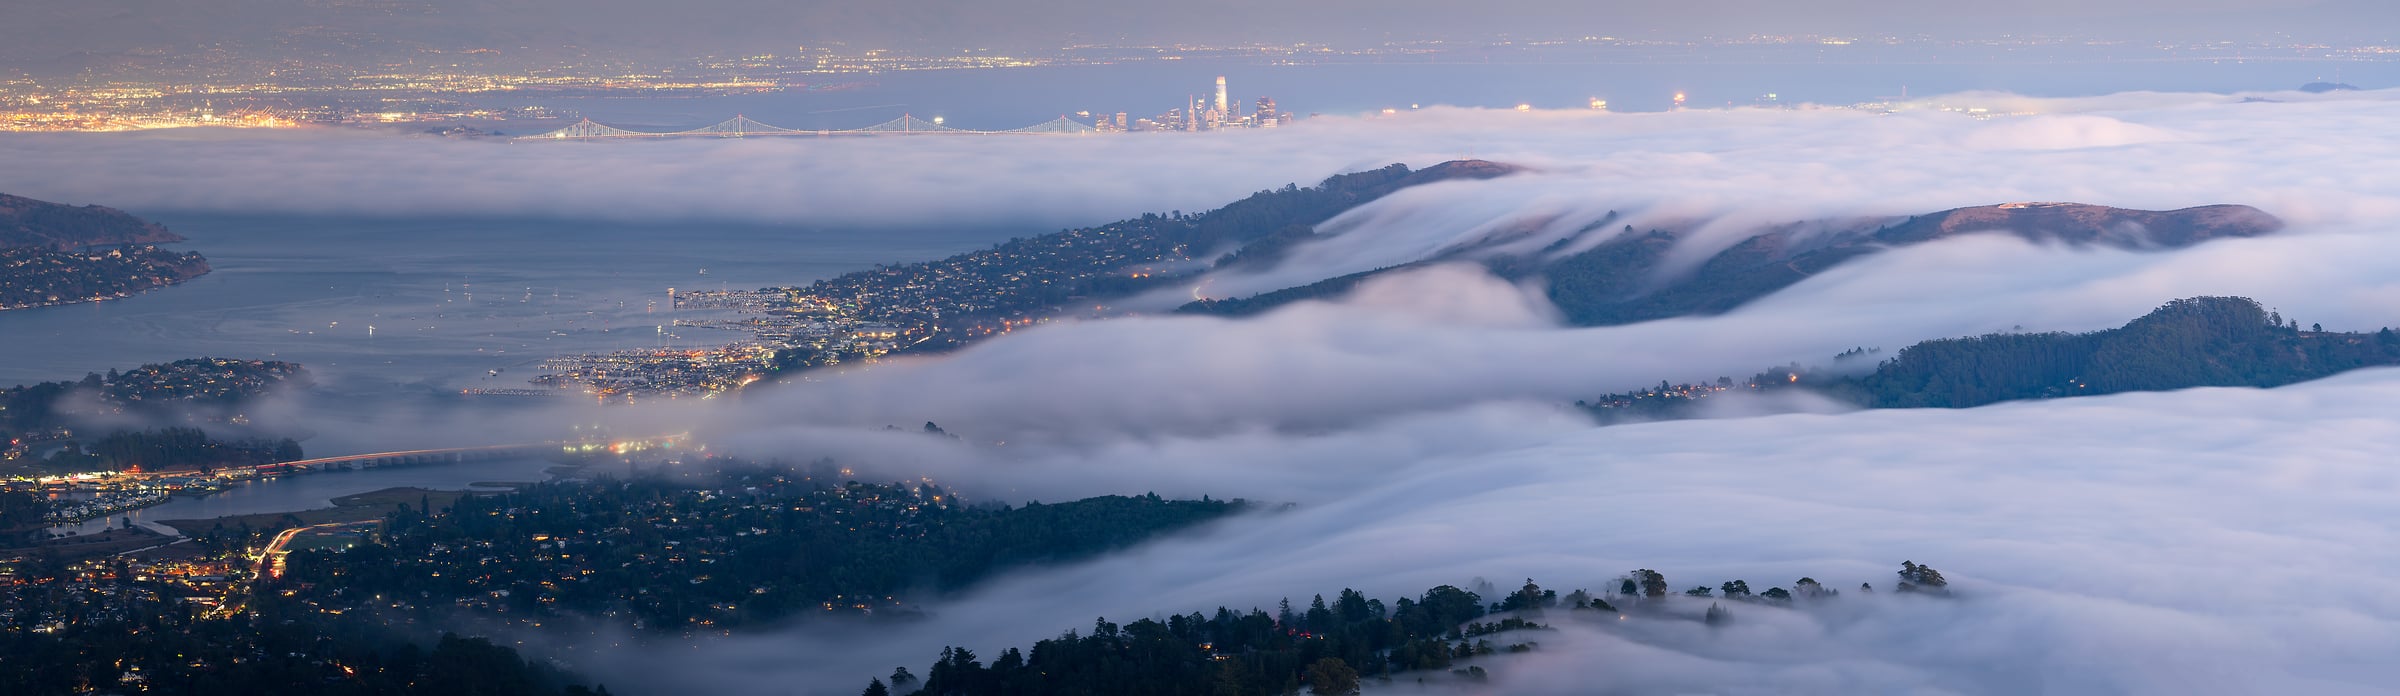 295 megapixels! A very high resolution, large-format VAST photo print of fog in the San Francisco Bay area at night; panorama photograph created by Jeff Lewis in Marin County, California.